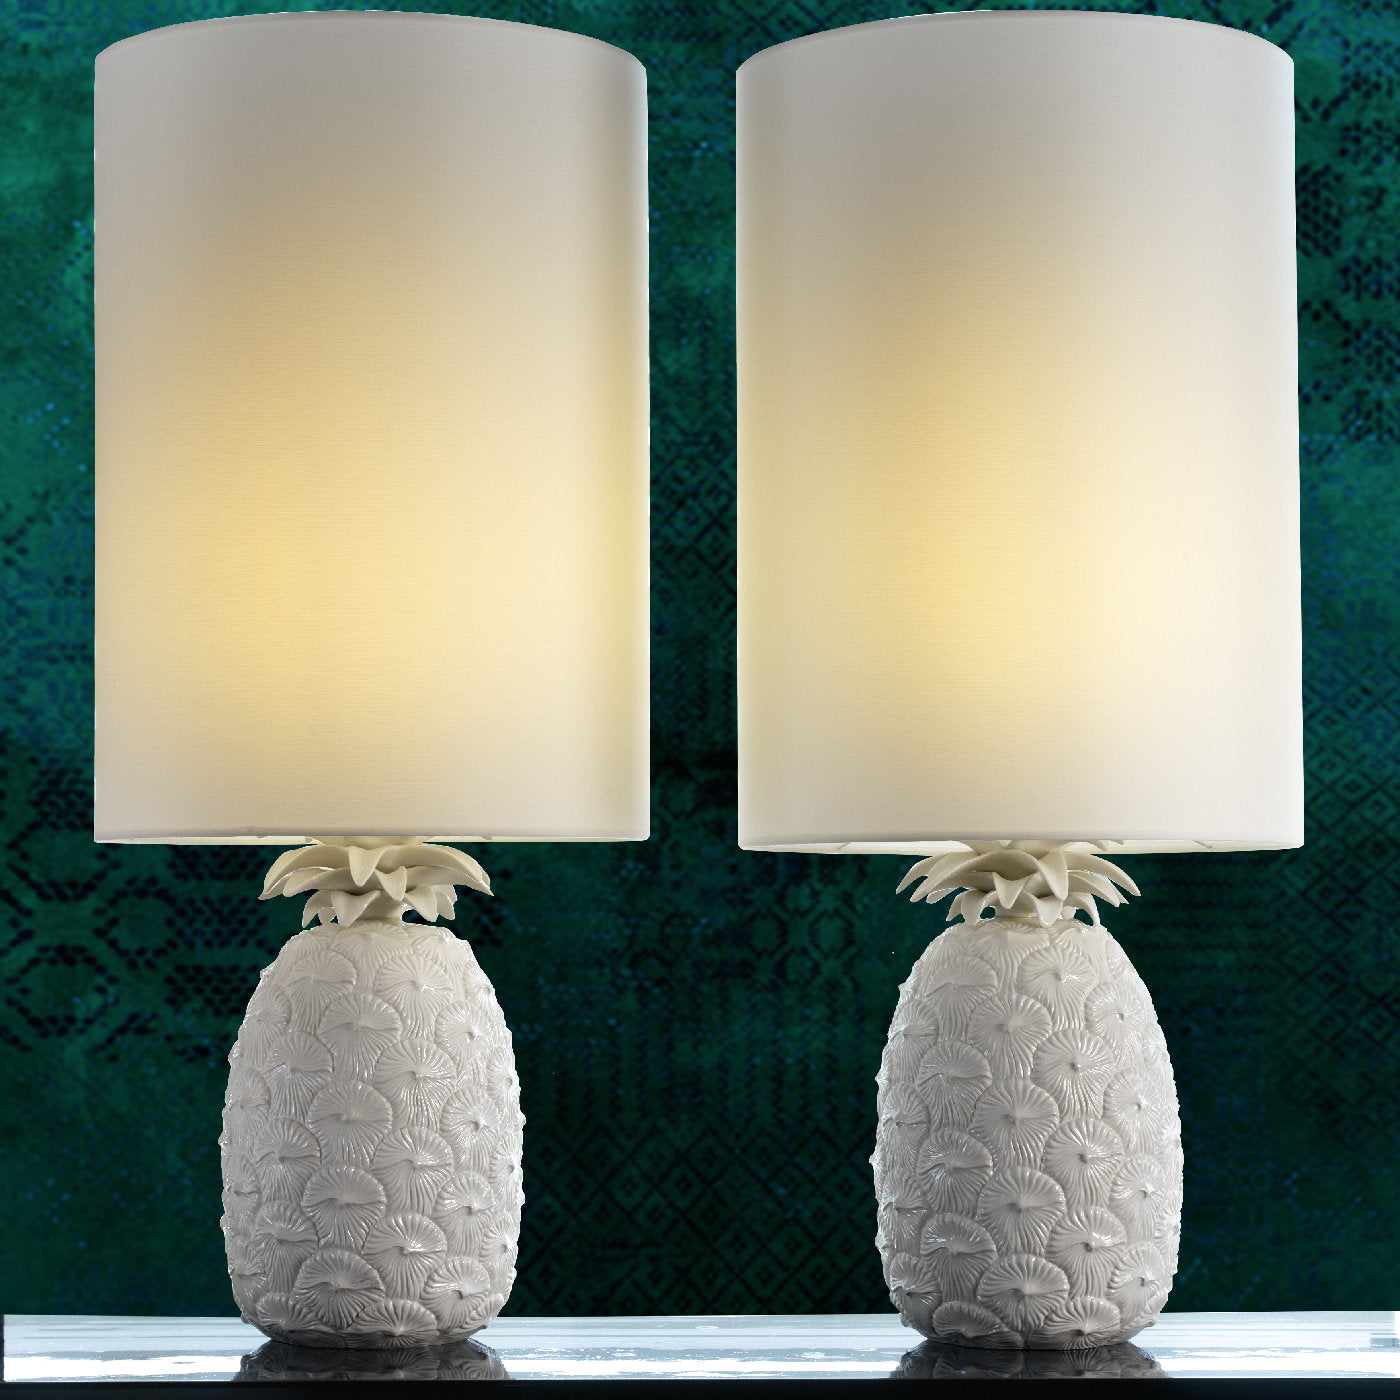 Pineapple Small Table Lamp - Alternative view 1